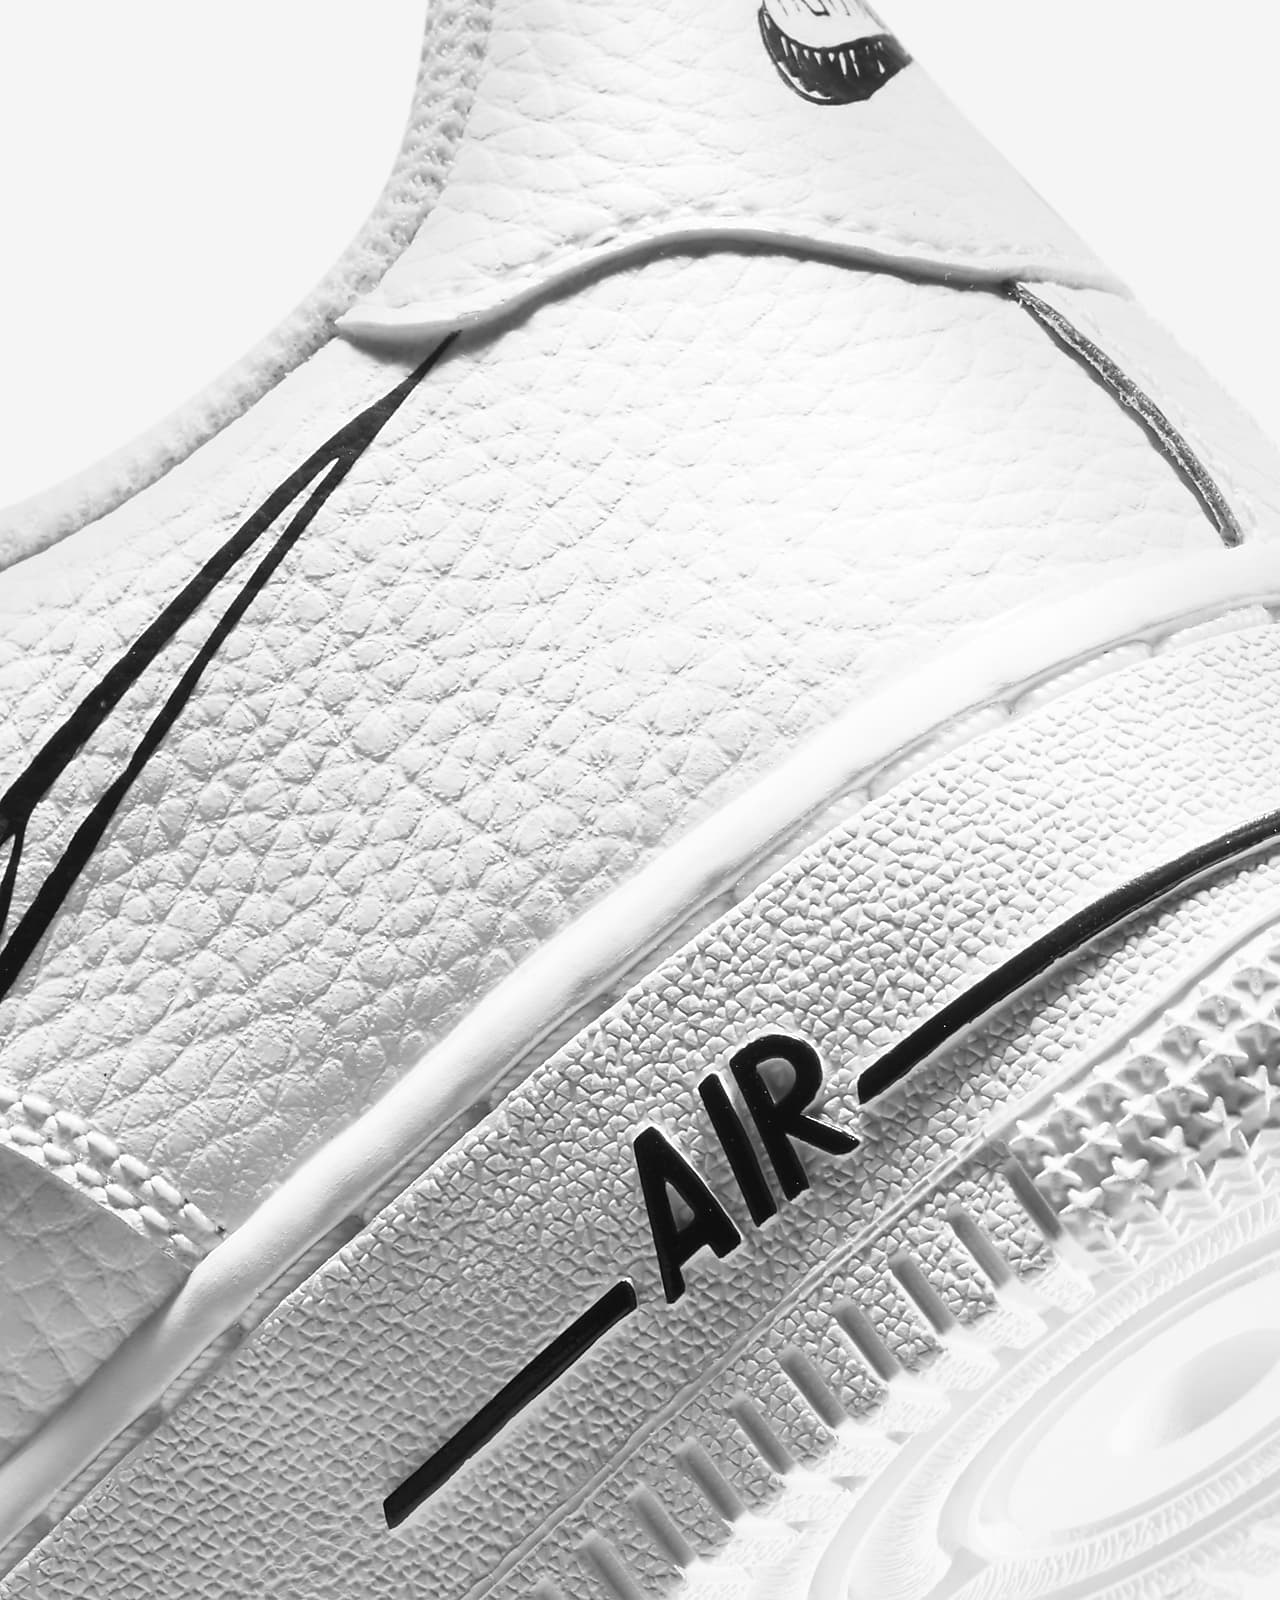 white air force 1 low kids